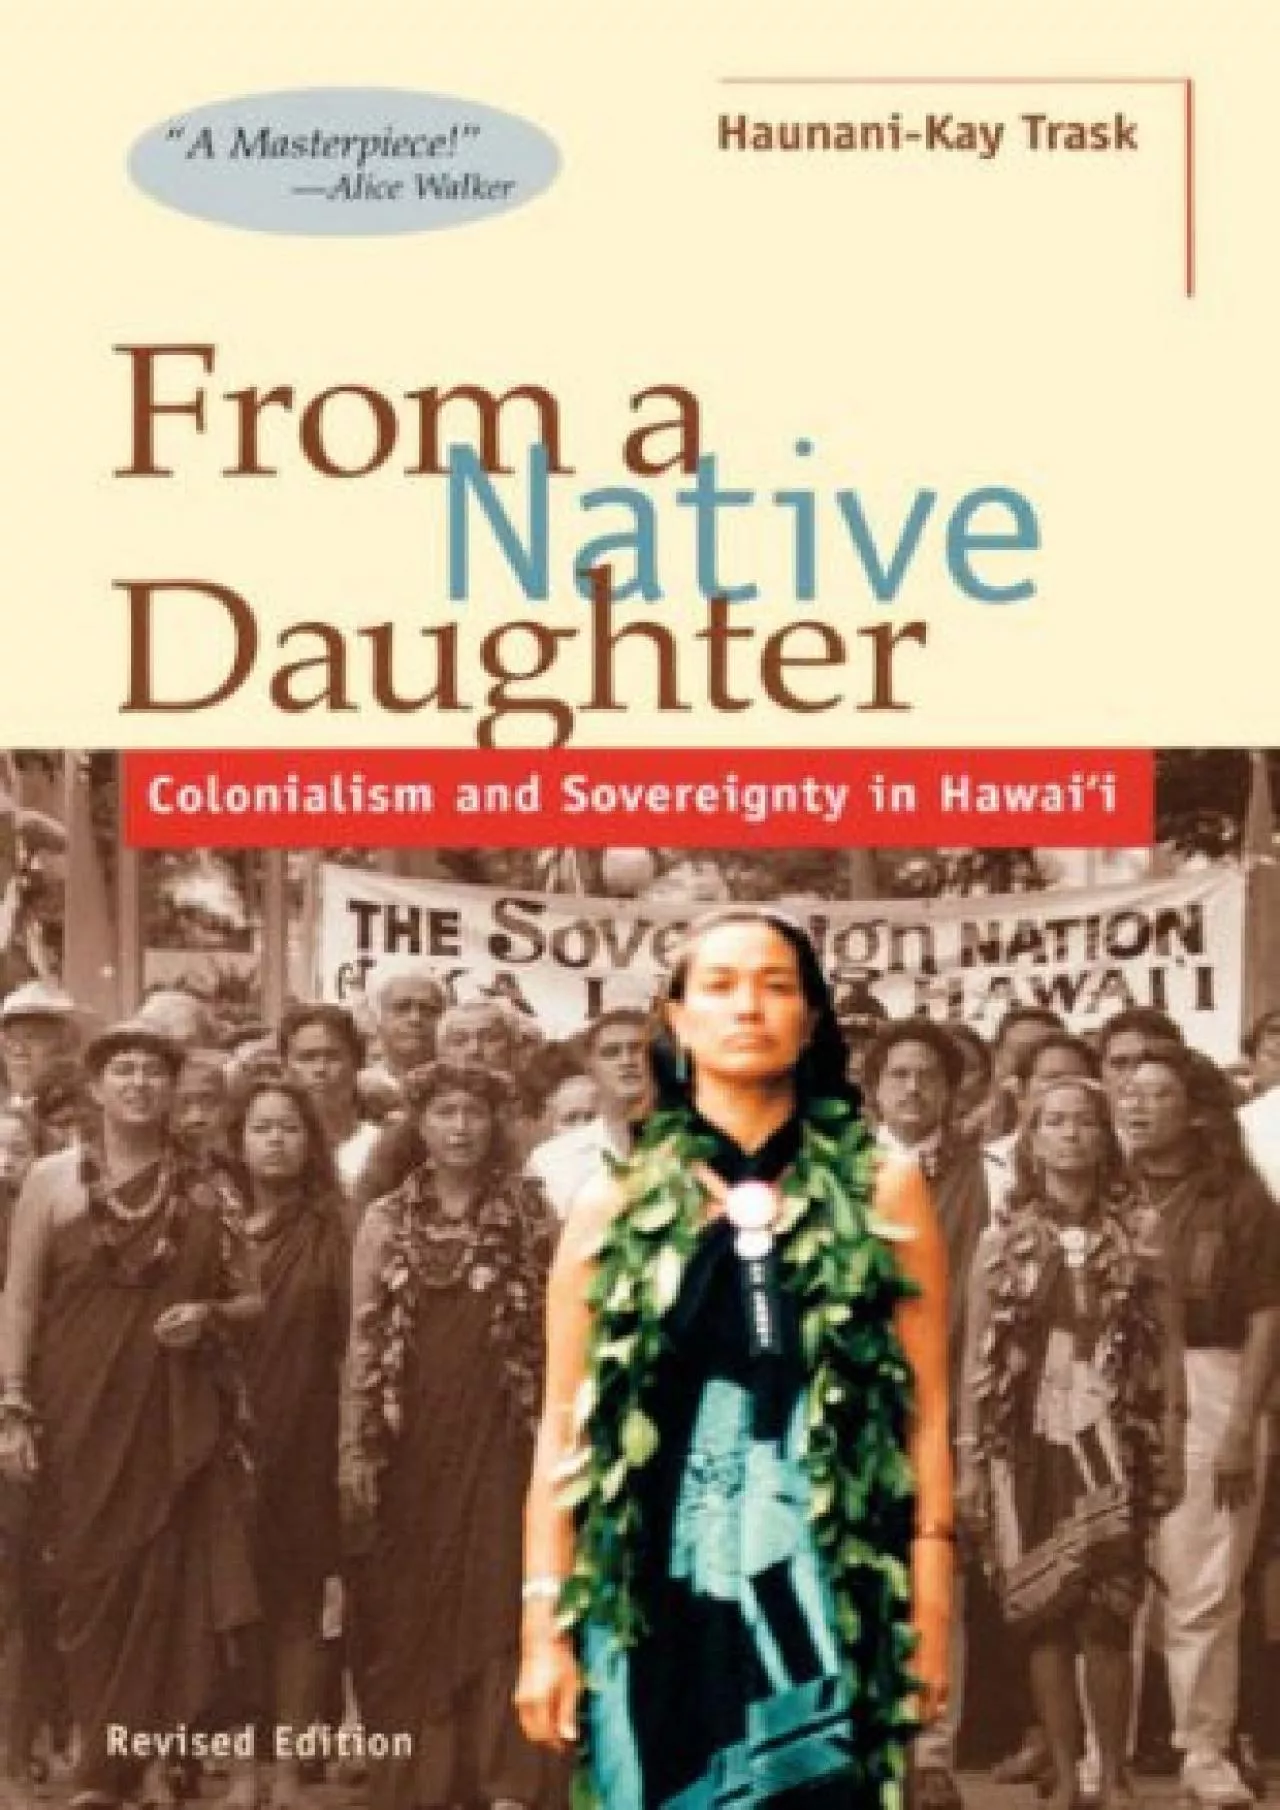 (EBOOK)-From a Native Daughter: Colonialism and Sovereignty in Hawaii (Revised Edition)